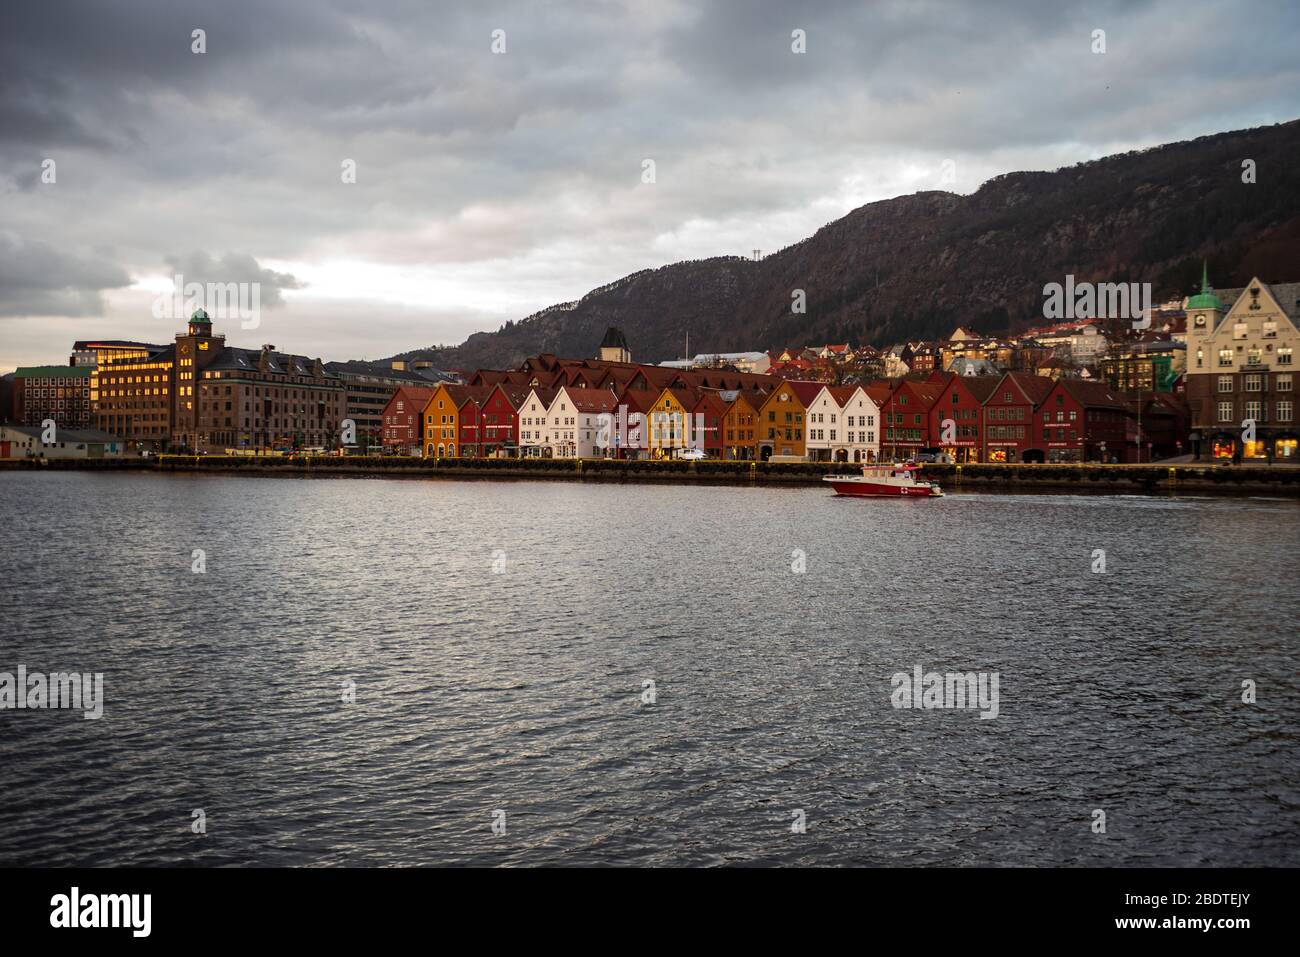 A popular tourist destination Bryggen in Bergen, Norway empty during the covid-19 epidemic. A Red Cross Charity boat can be seen leaving the harbour. Stock Photo